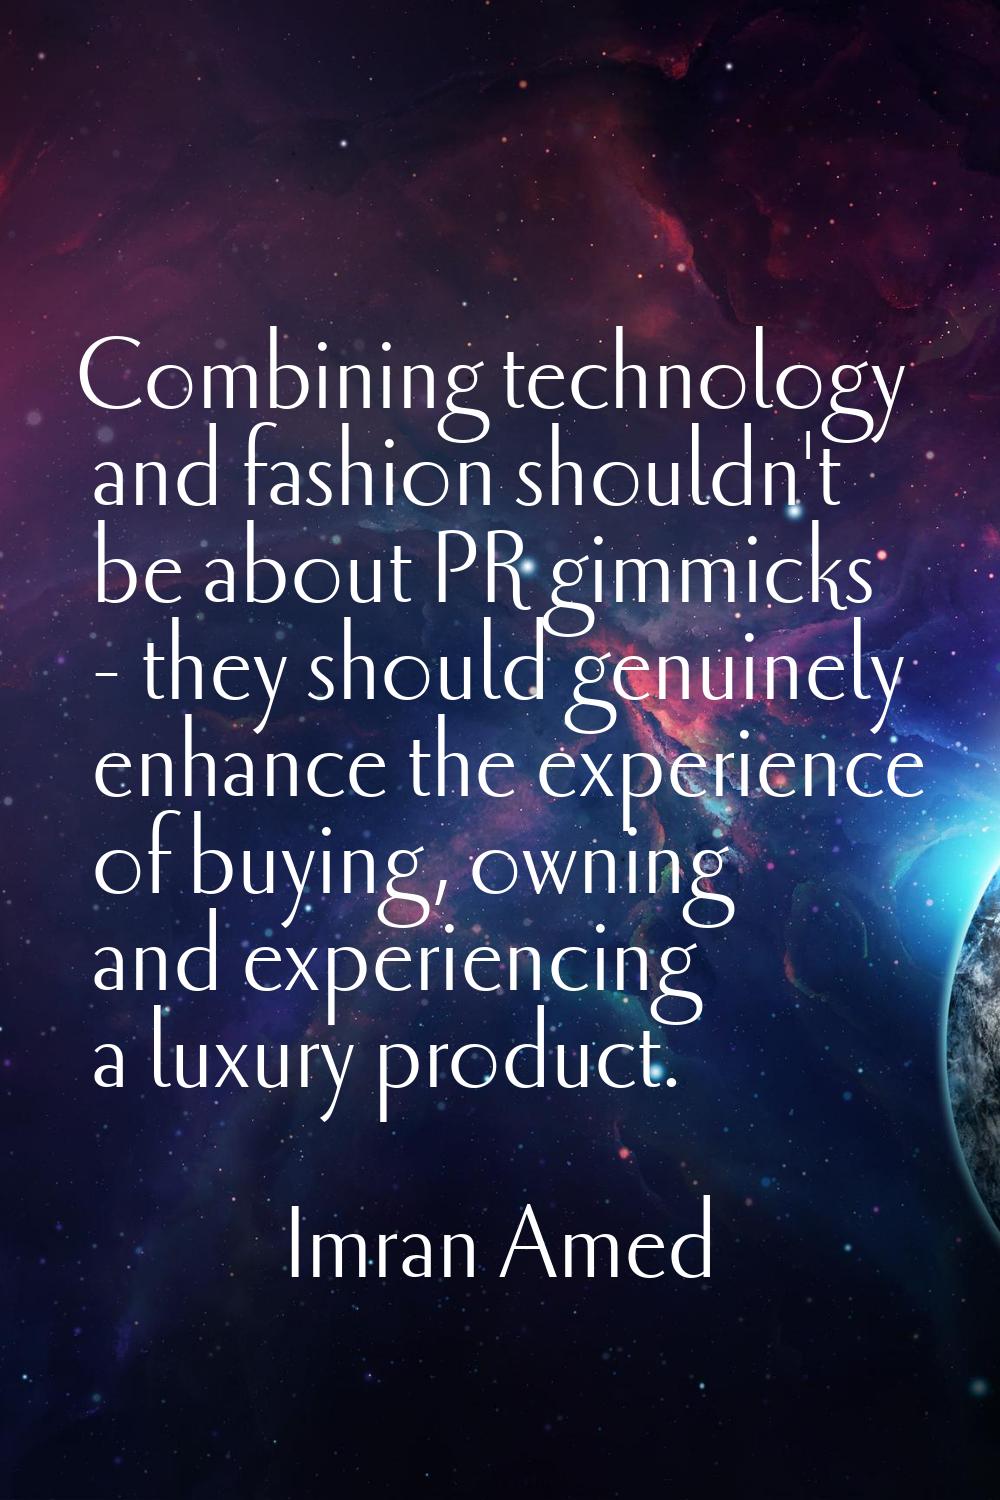 Combining technology and fashion shouldn't be about PR gimmicks - they should genuinely enhance the